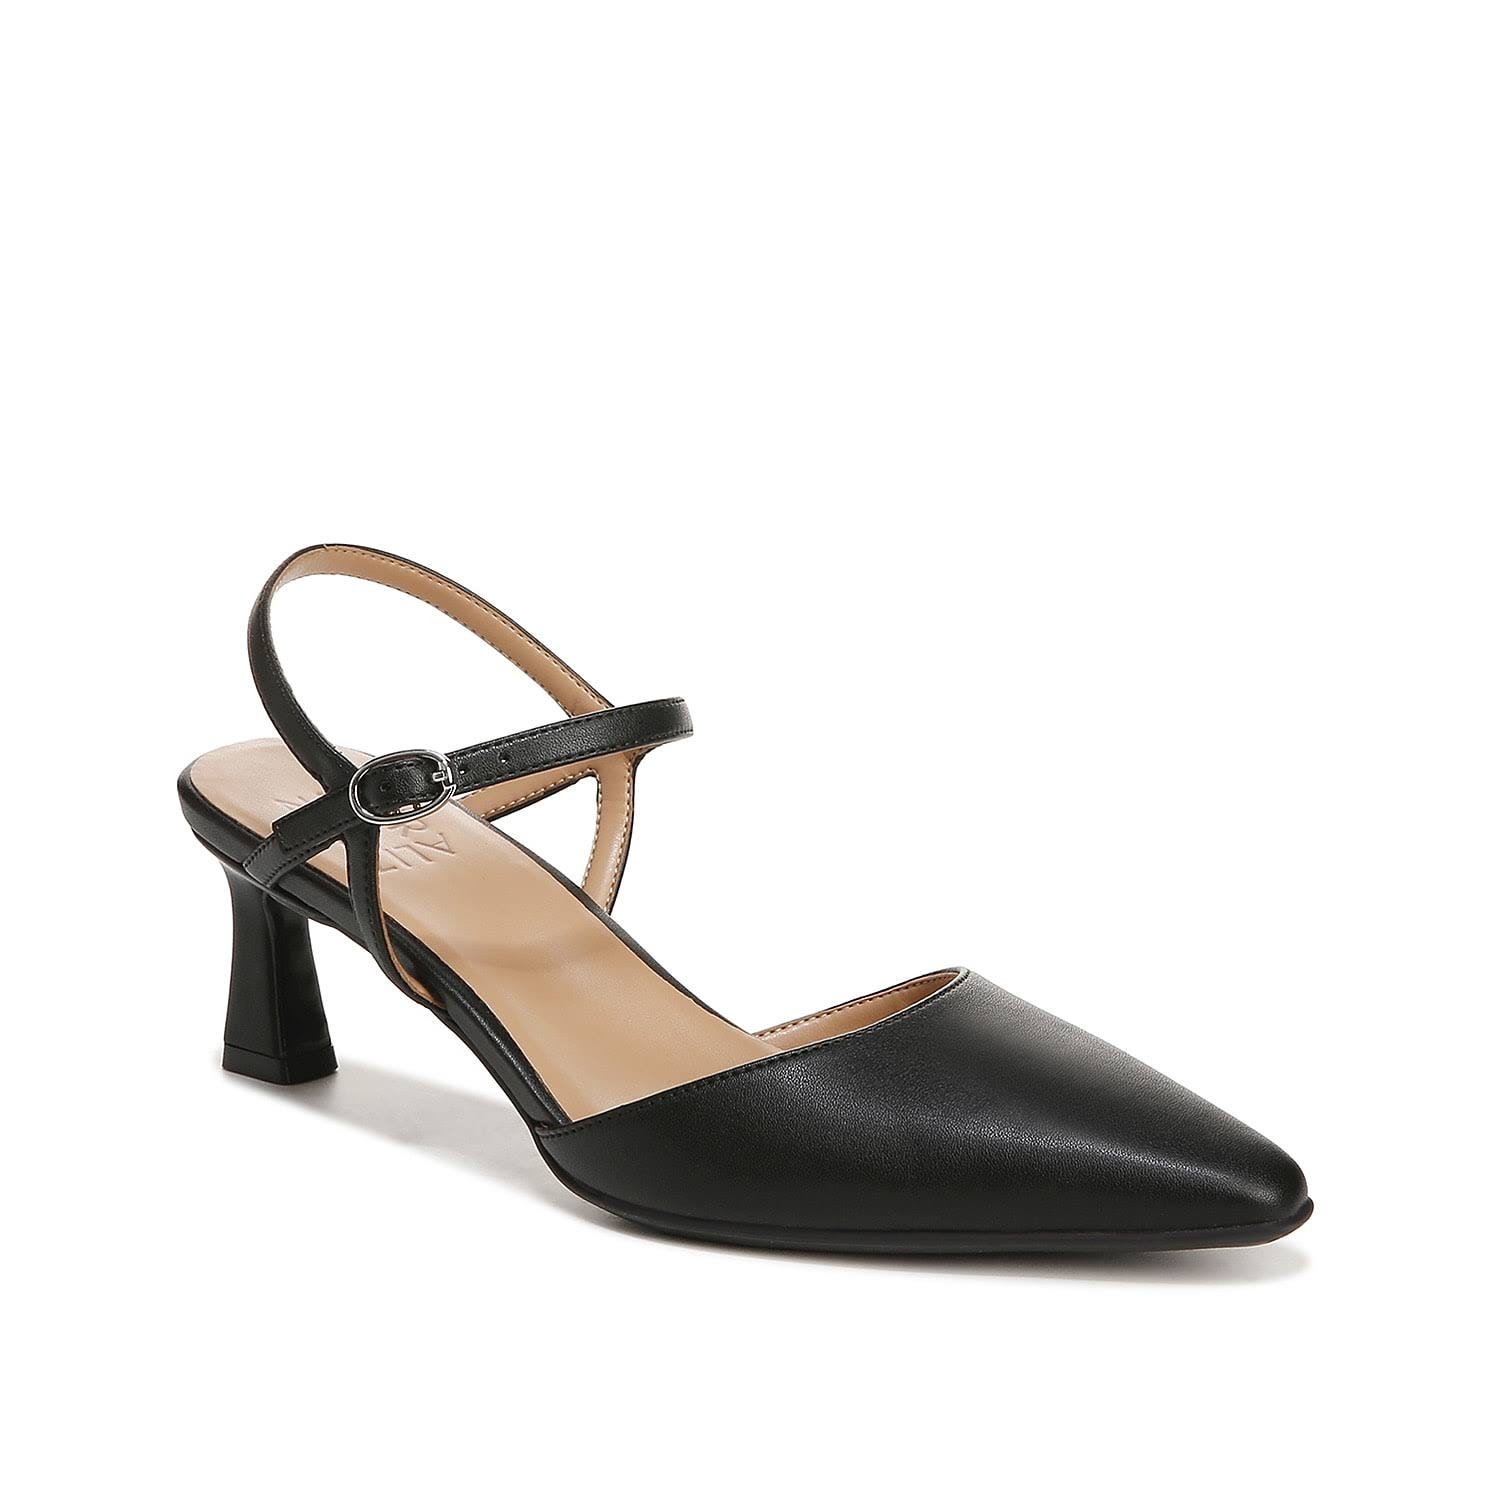 Sustainable Comfort: Tara Ankle Strap Pumps by Naturalizer | Image